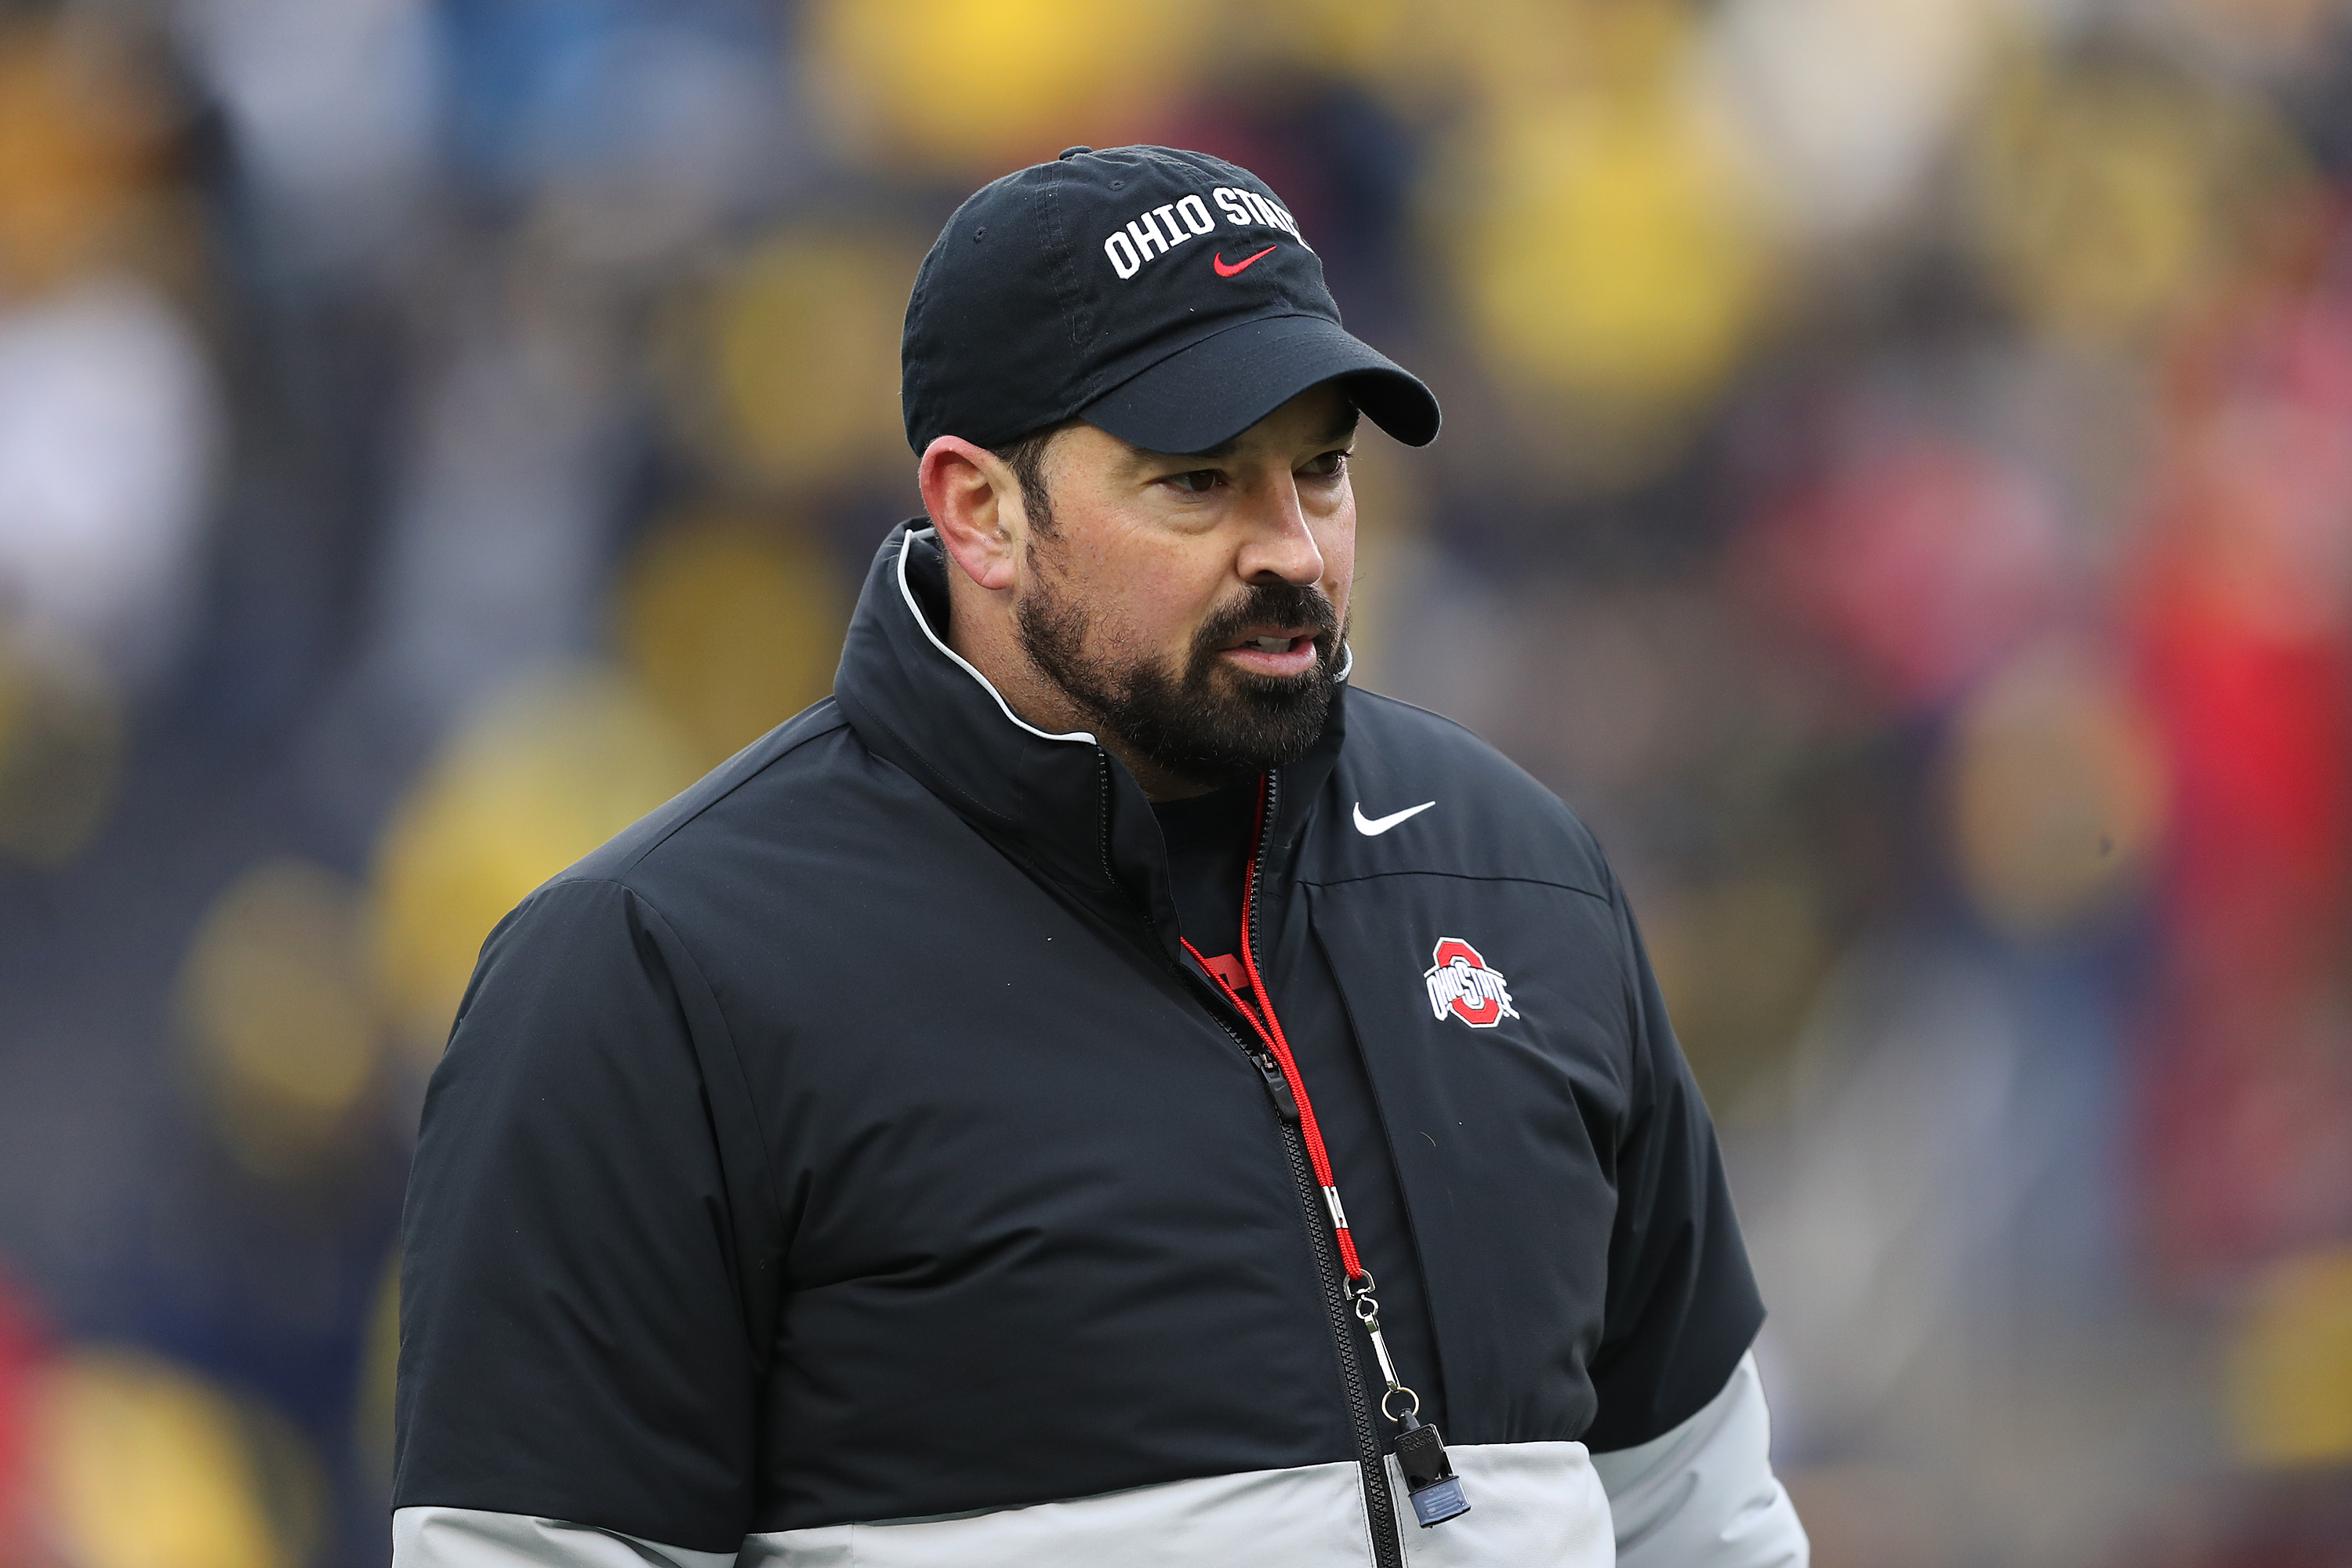 Ryan Day Discusses Ohio State's Loss to Michigan: 'I Feel Awful. ... It's a Failure'